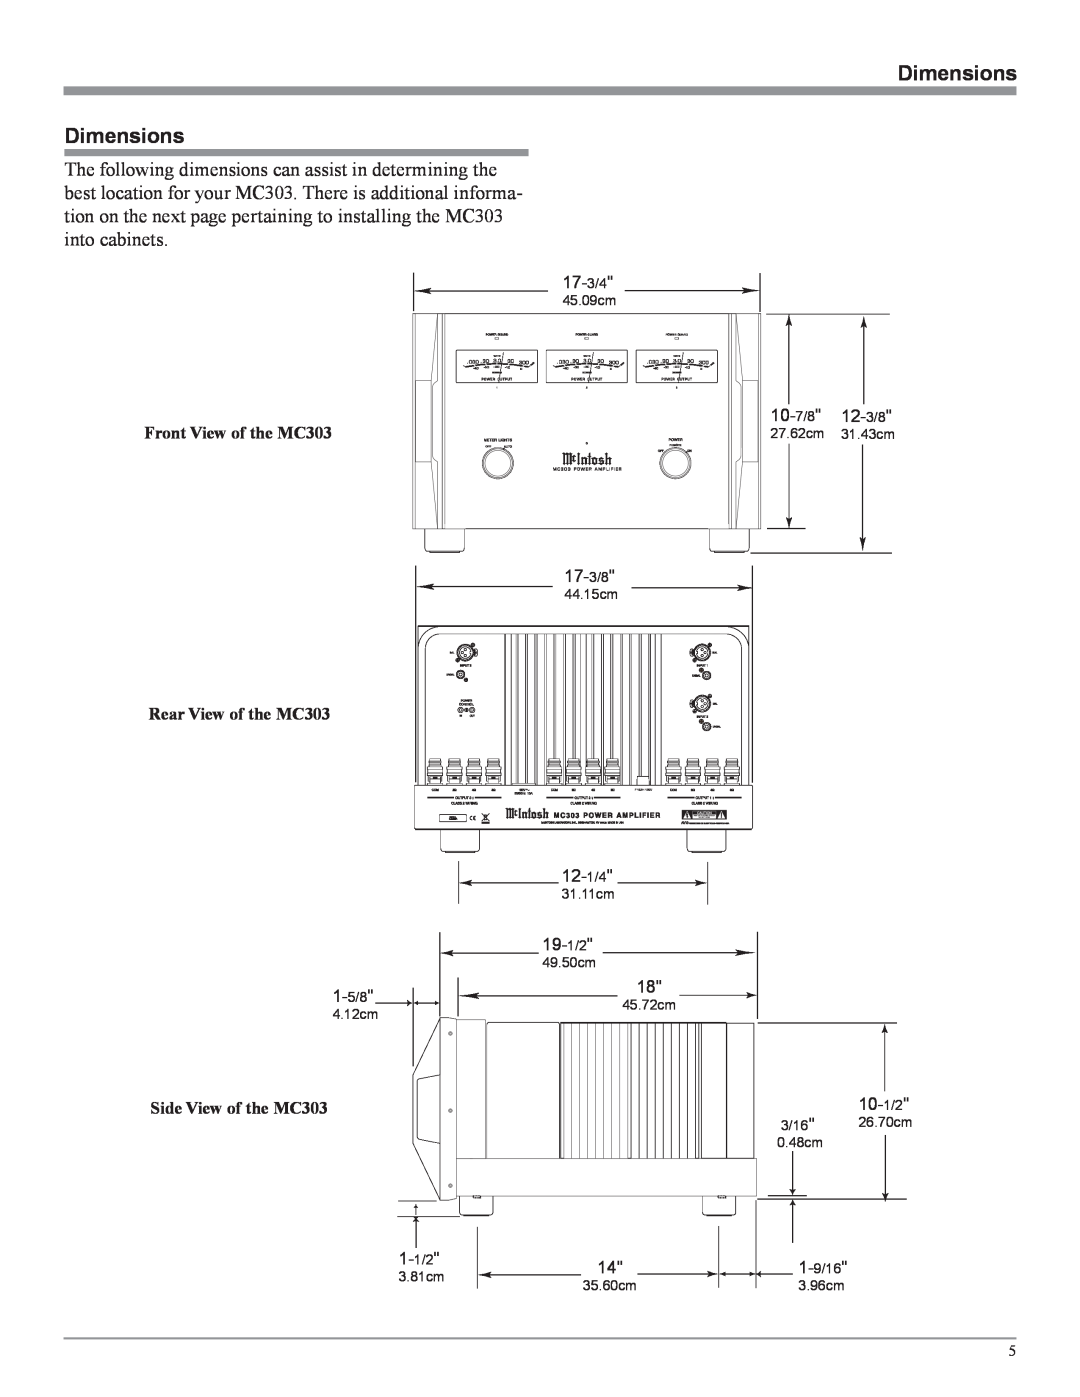 McIntosh owner manual Dimensions Dimensions, Front View of the MC303 Rear View of the MC303, Side View of the MC303 